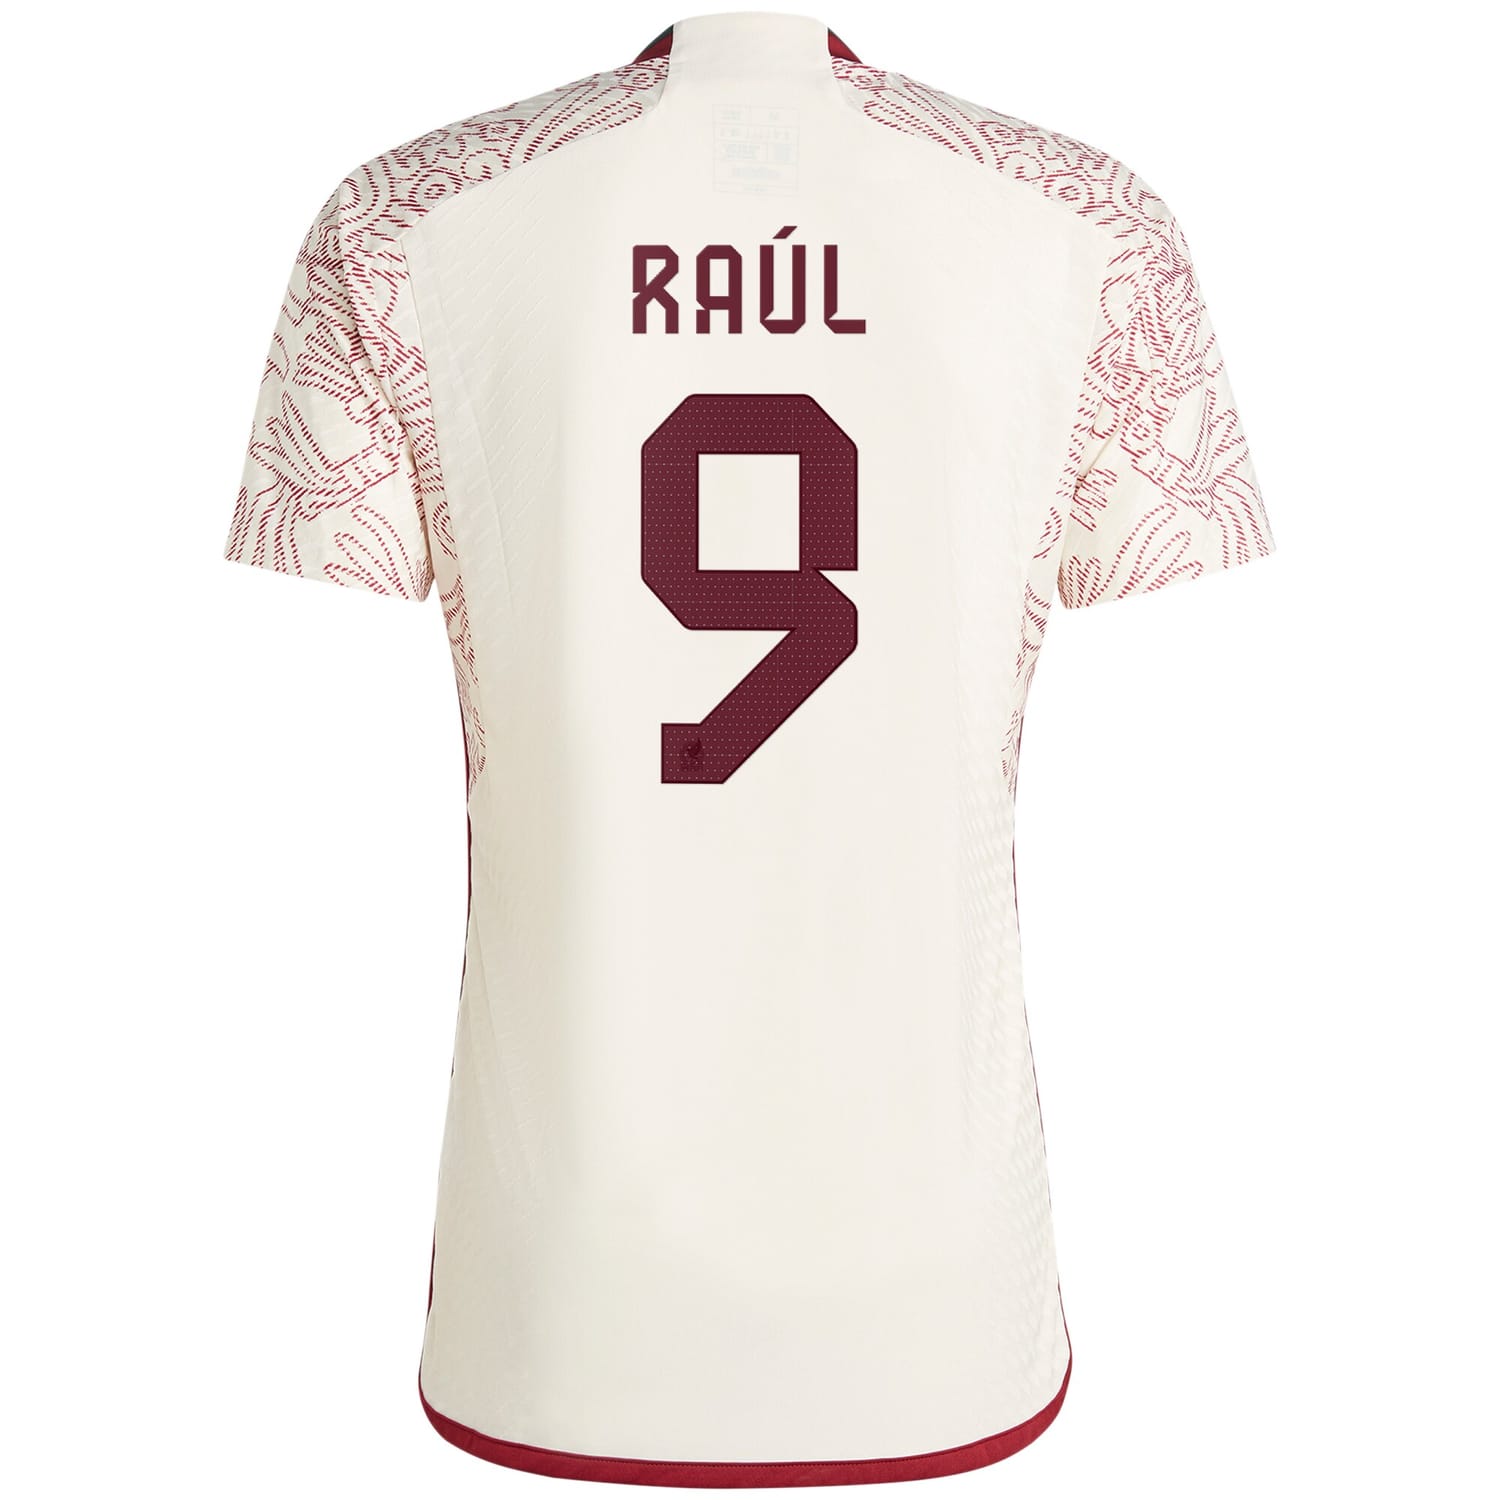 Mexico National Team Away Authentic Jersey Shirt White 2022-23 player Raul Jimenez printing for Men